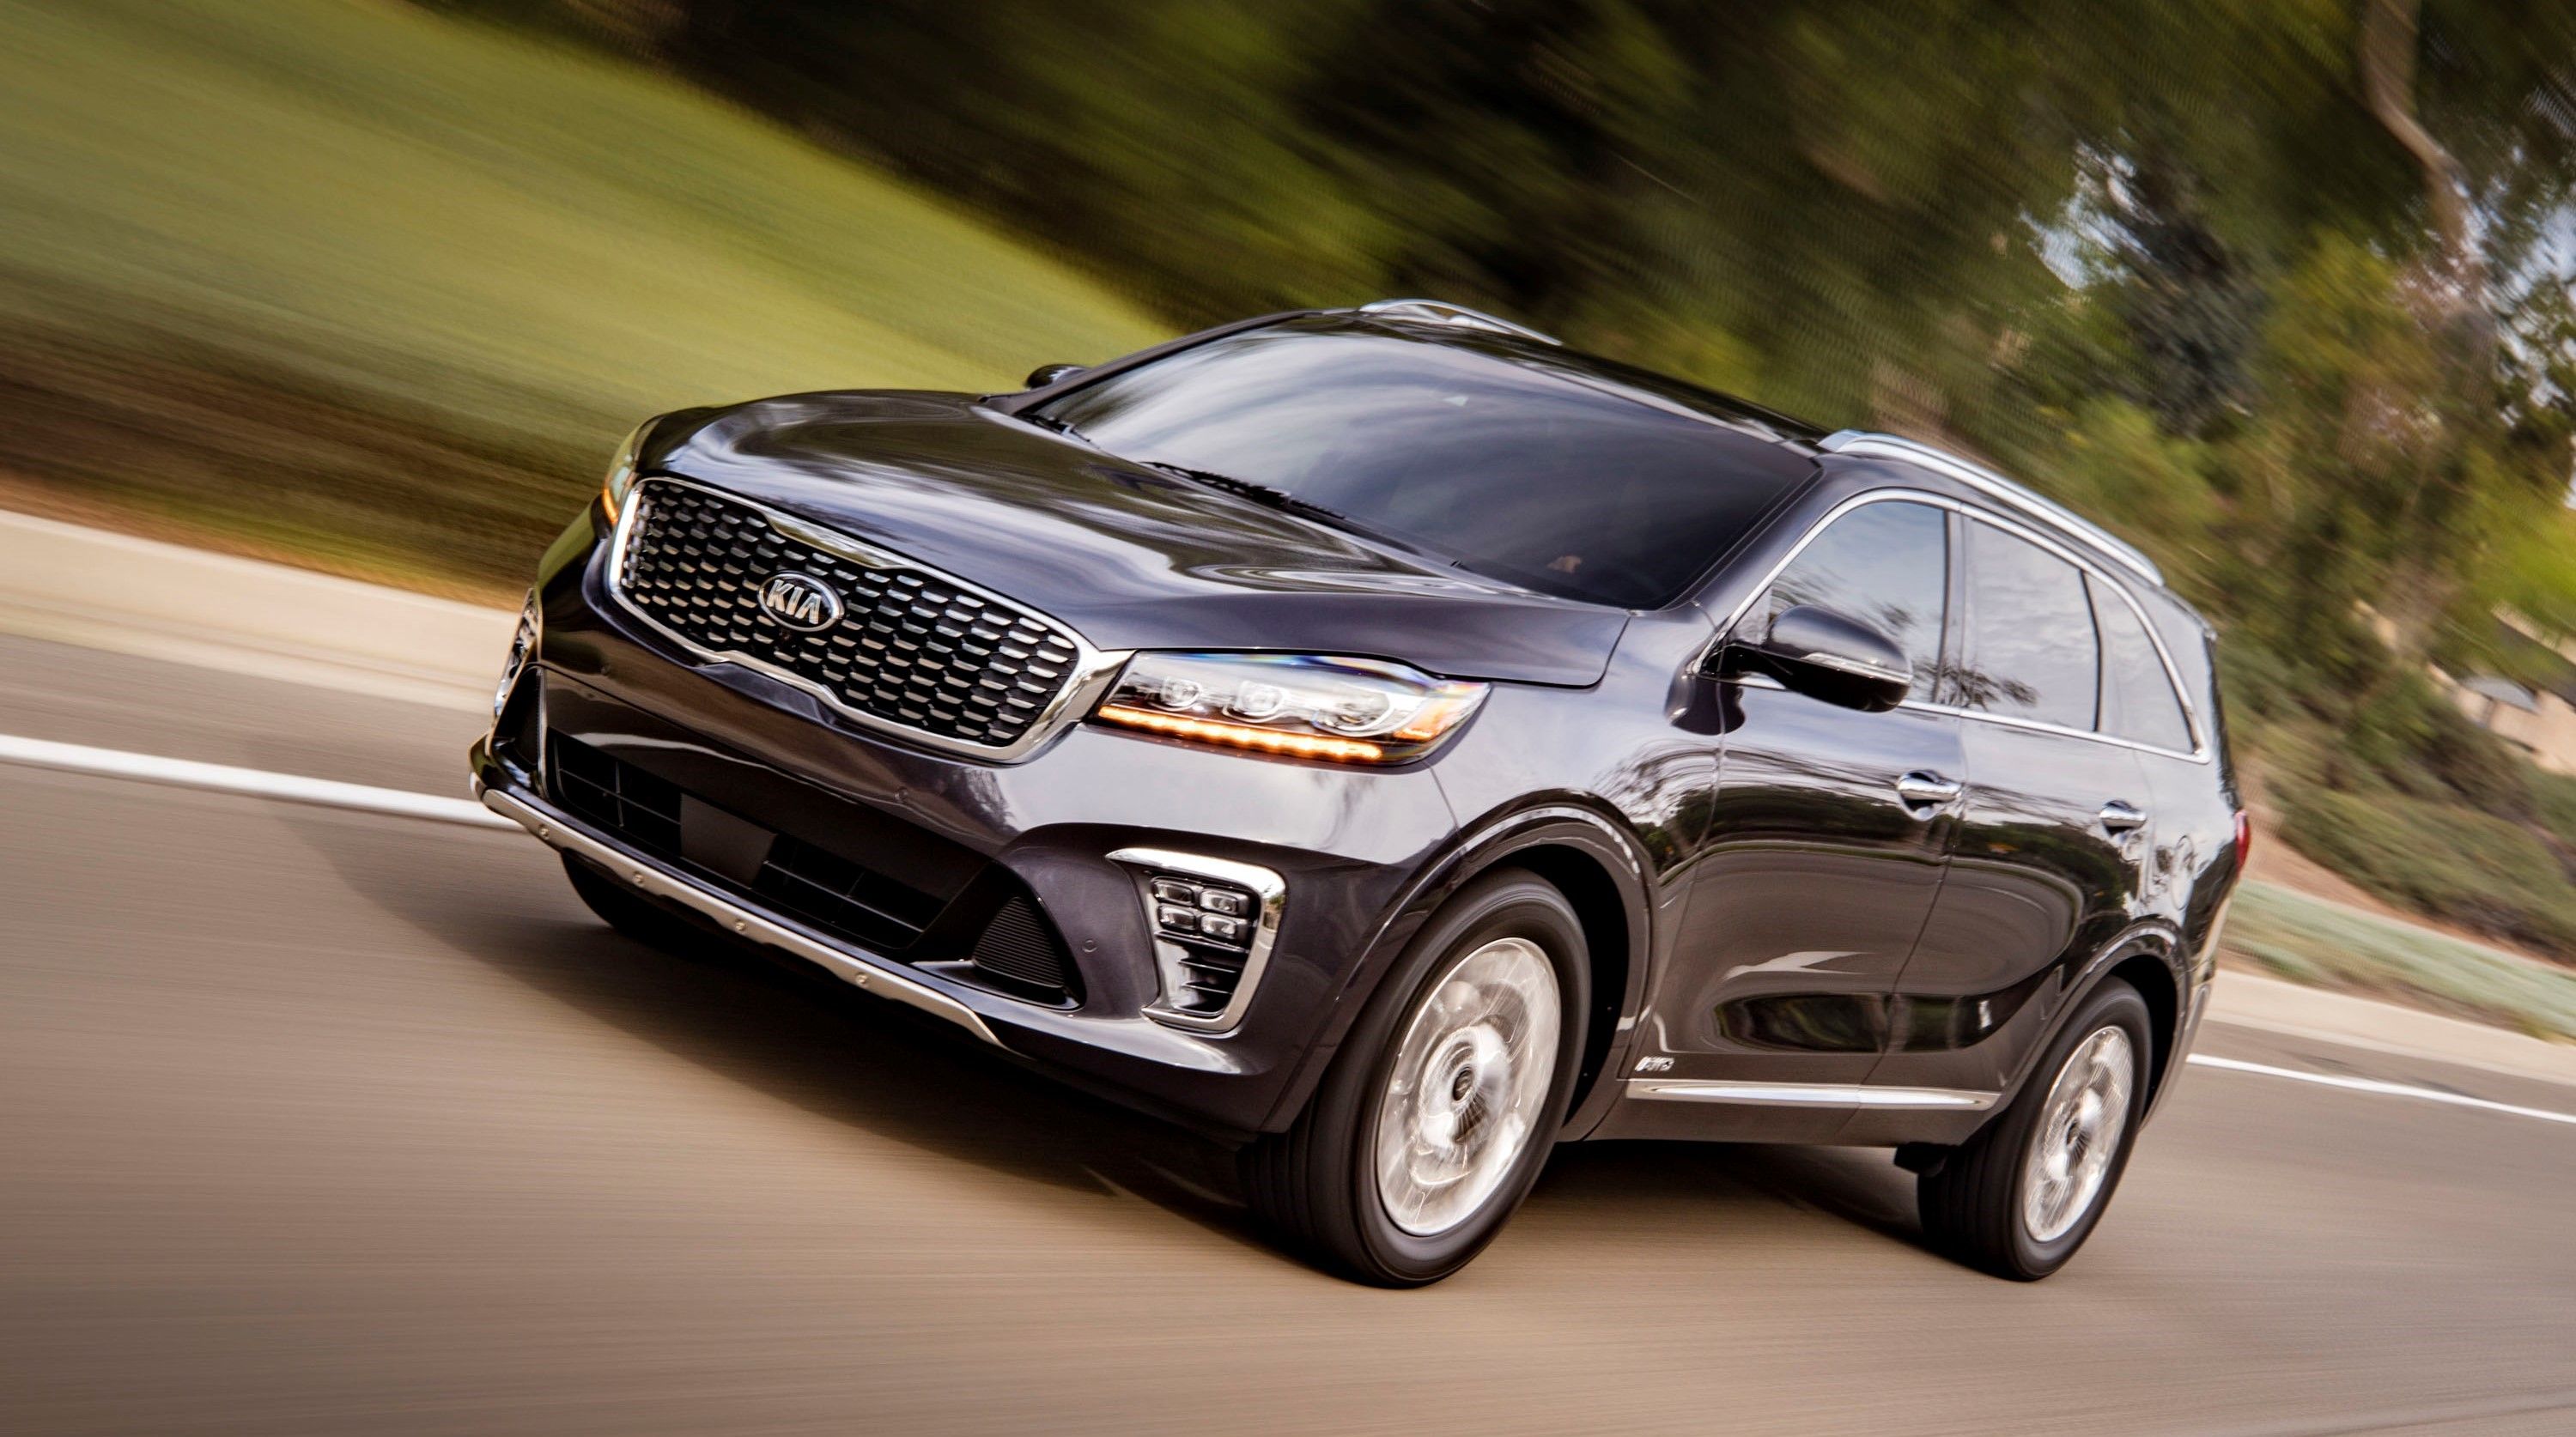 2018 Updated Kia Sorento Unveiled in L.A. with New Features; Diesel Engine Confirmed